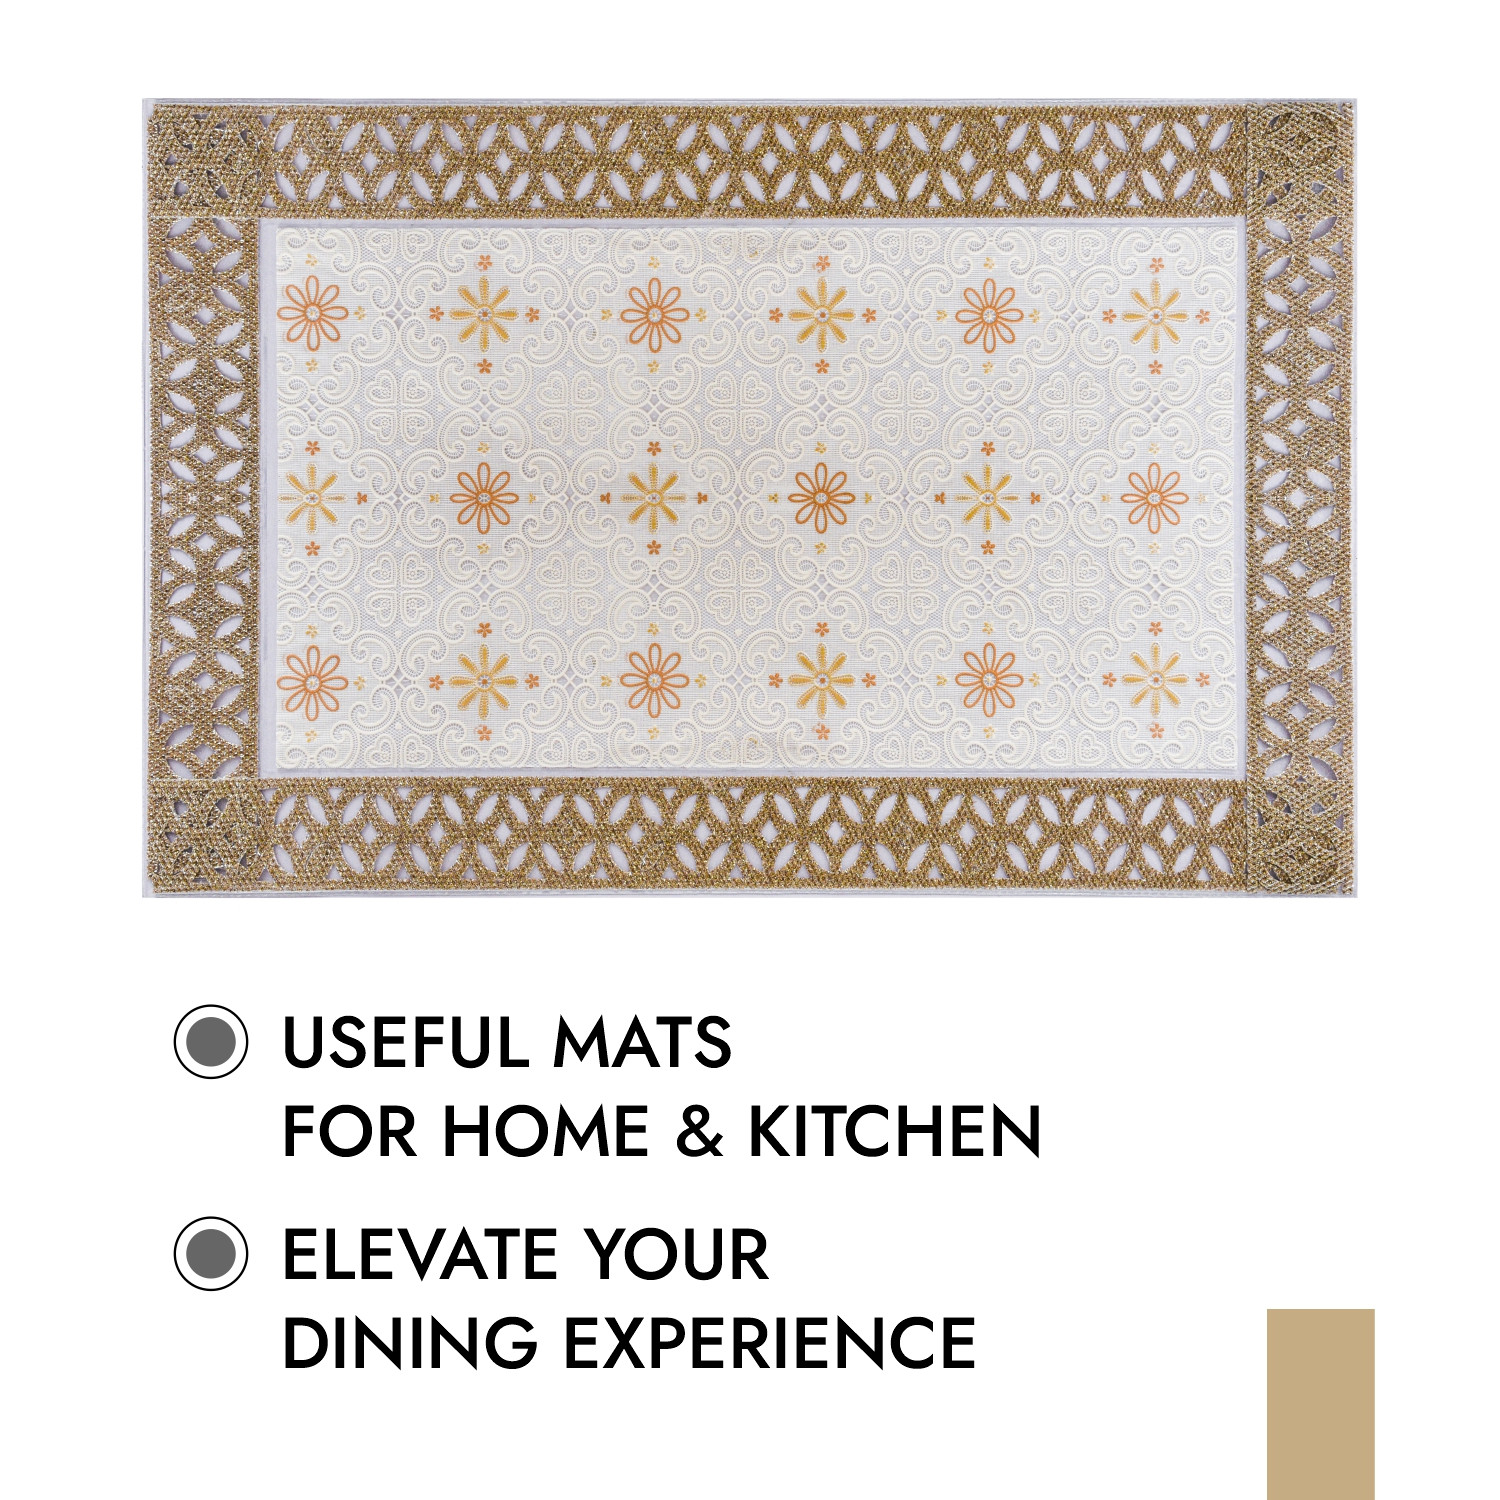 Kuber Industries Placemat | Placemats for Dining Room | Desginer Table Mat Set | Placemats for Kitchen Table | Dining Table Mats | Flower Maiva Placemat | 6 Piece Set | Cream